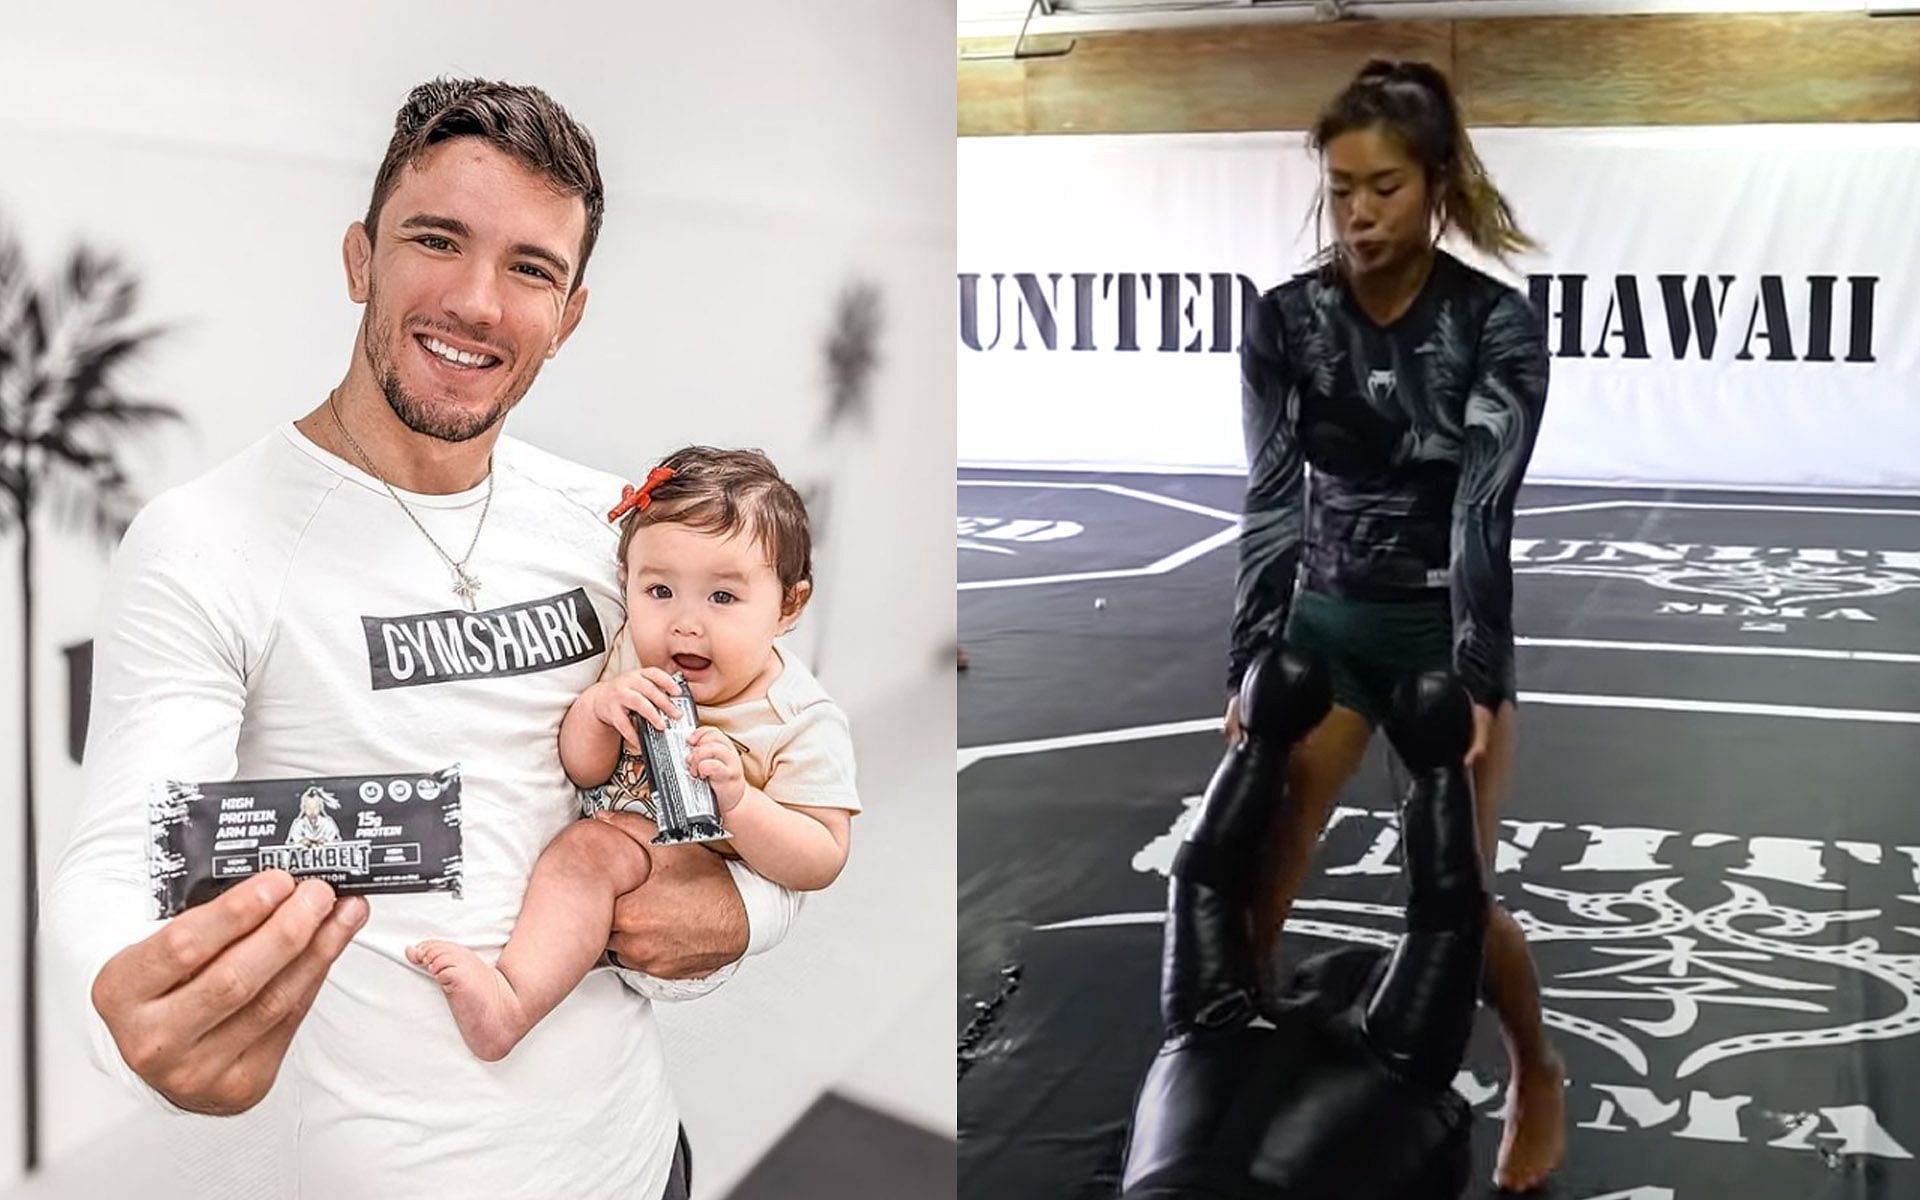 Bruno Pucci (Left) sees a different fire in Angela Lee (Right) as she trains to get back in the Circle. | [Photos: @bpucci on Instagram/ONE Championship]